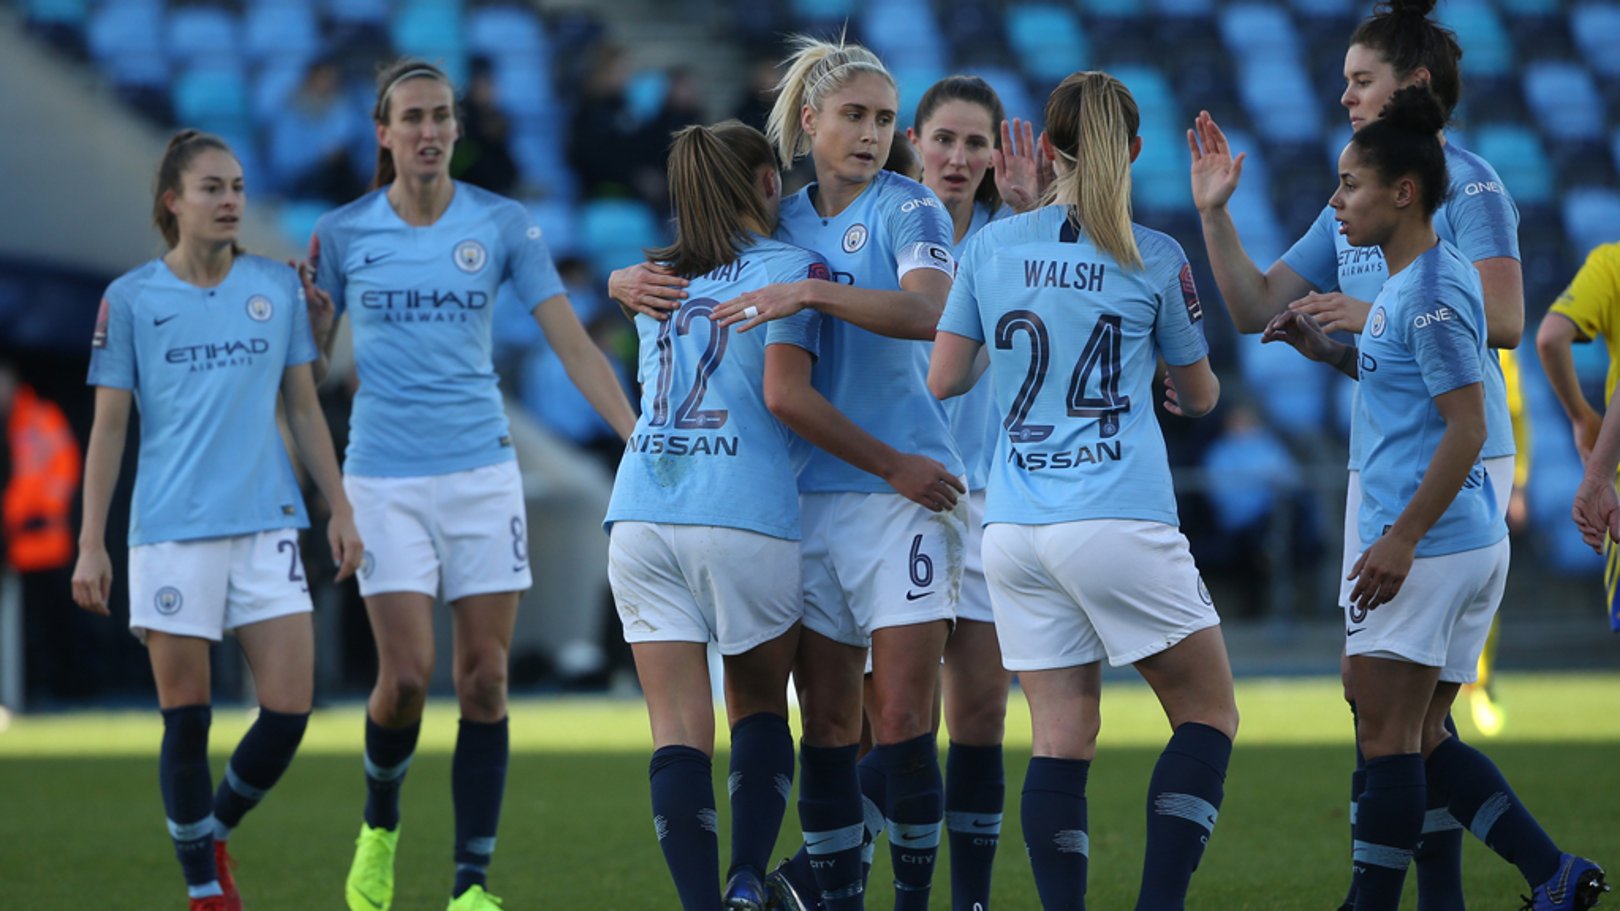 City learn Conti Cup quarter-final opponents